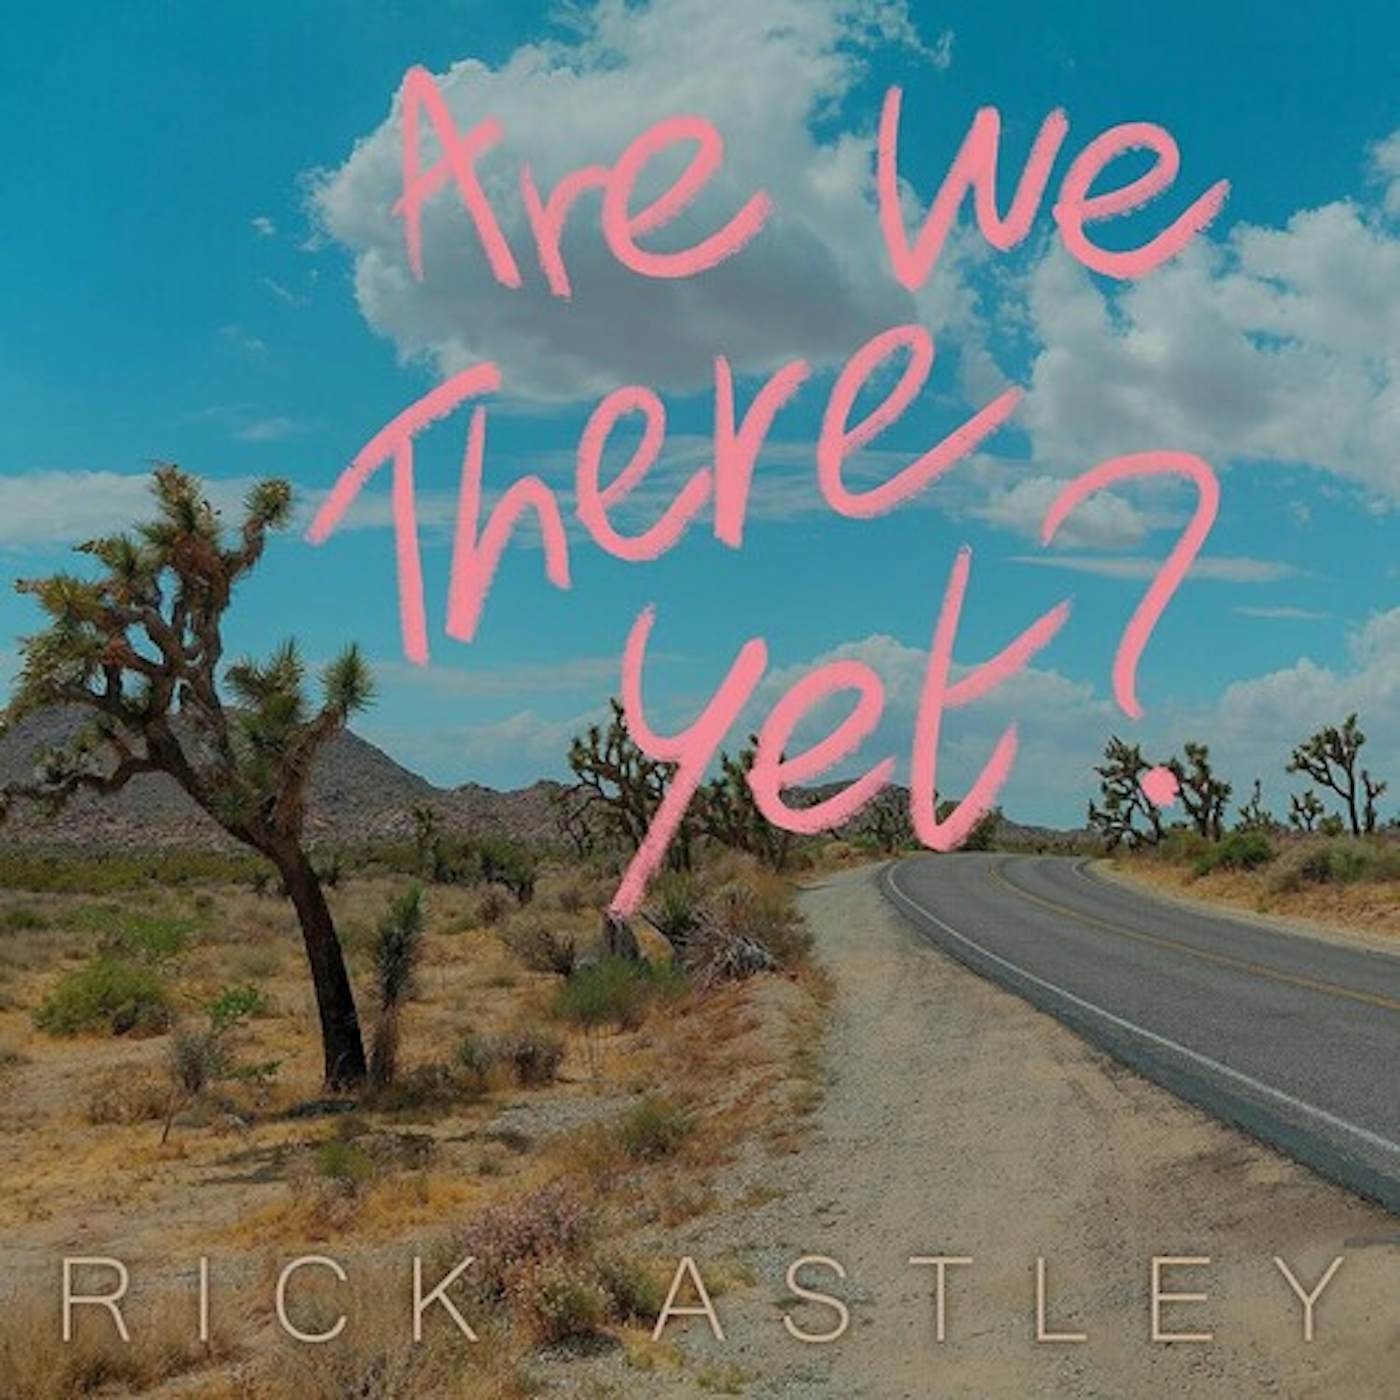 Rick Astley ARE WE THERE YET CD